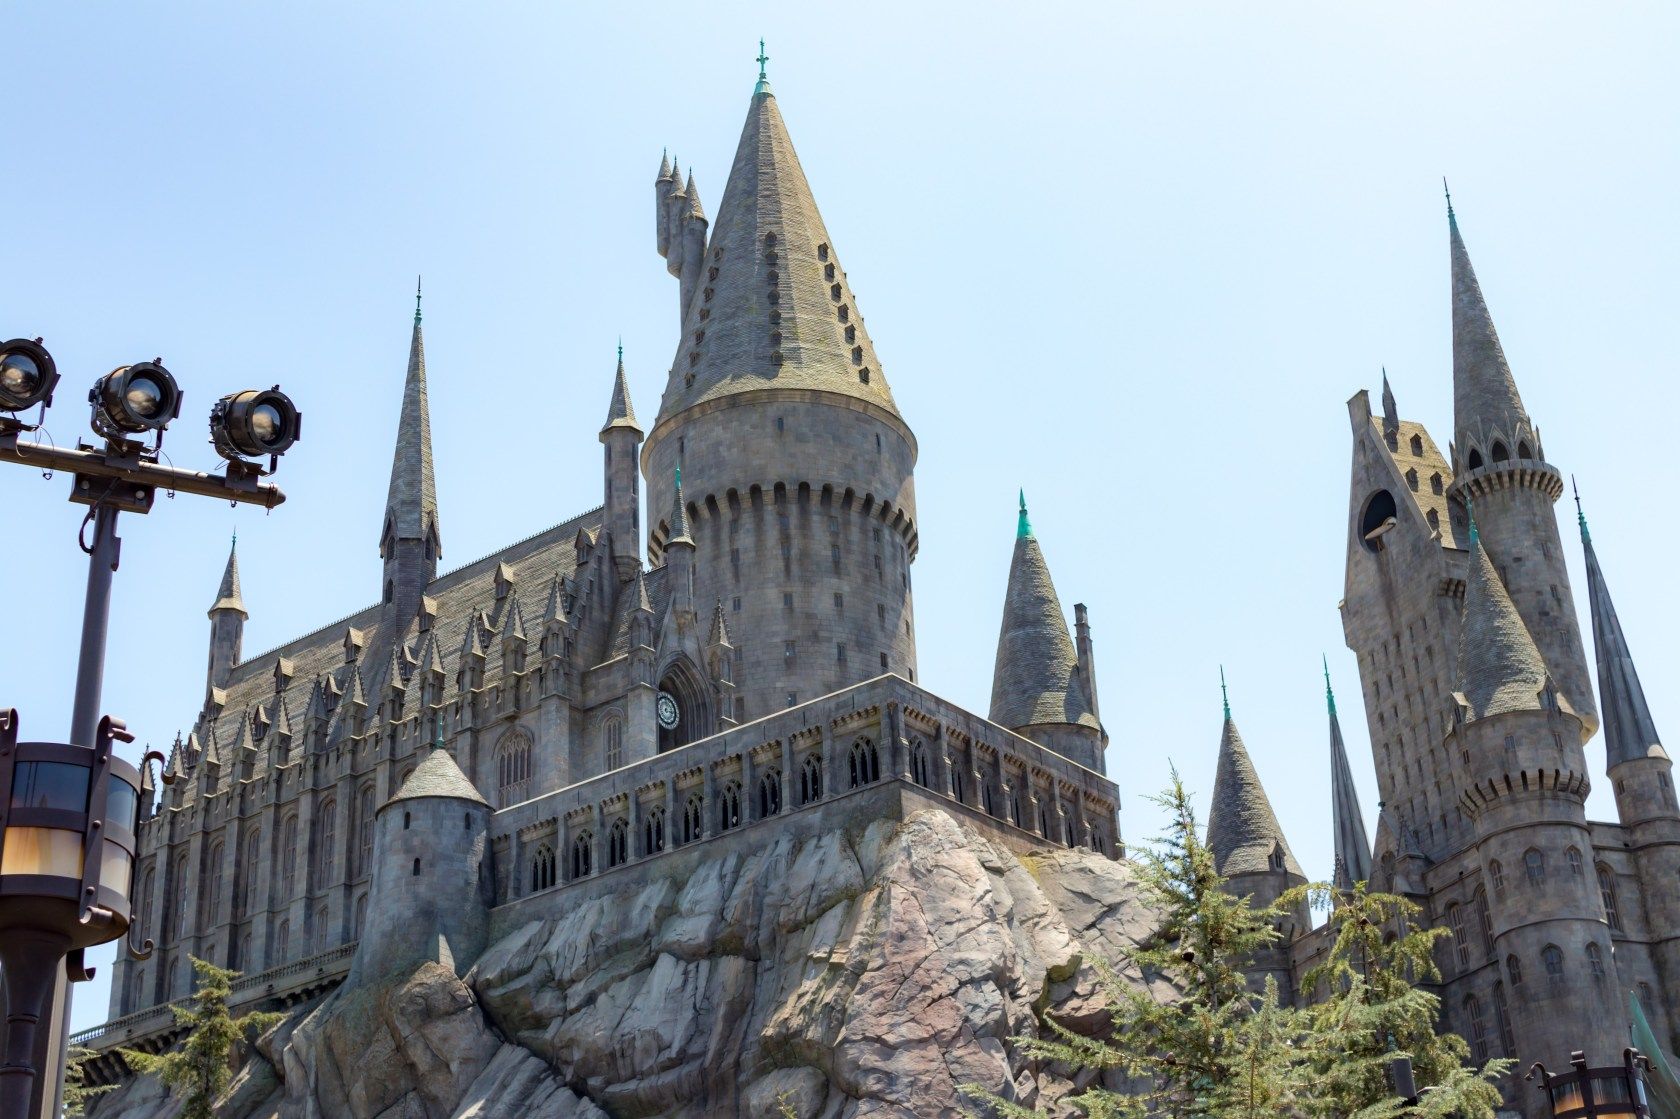 Universal Studio Hollywood – The Wizarding World of Harry Potter